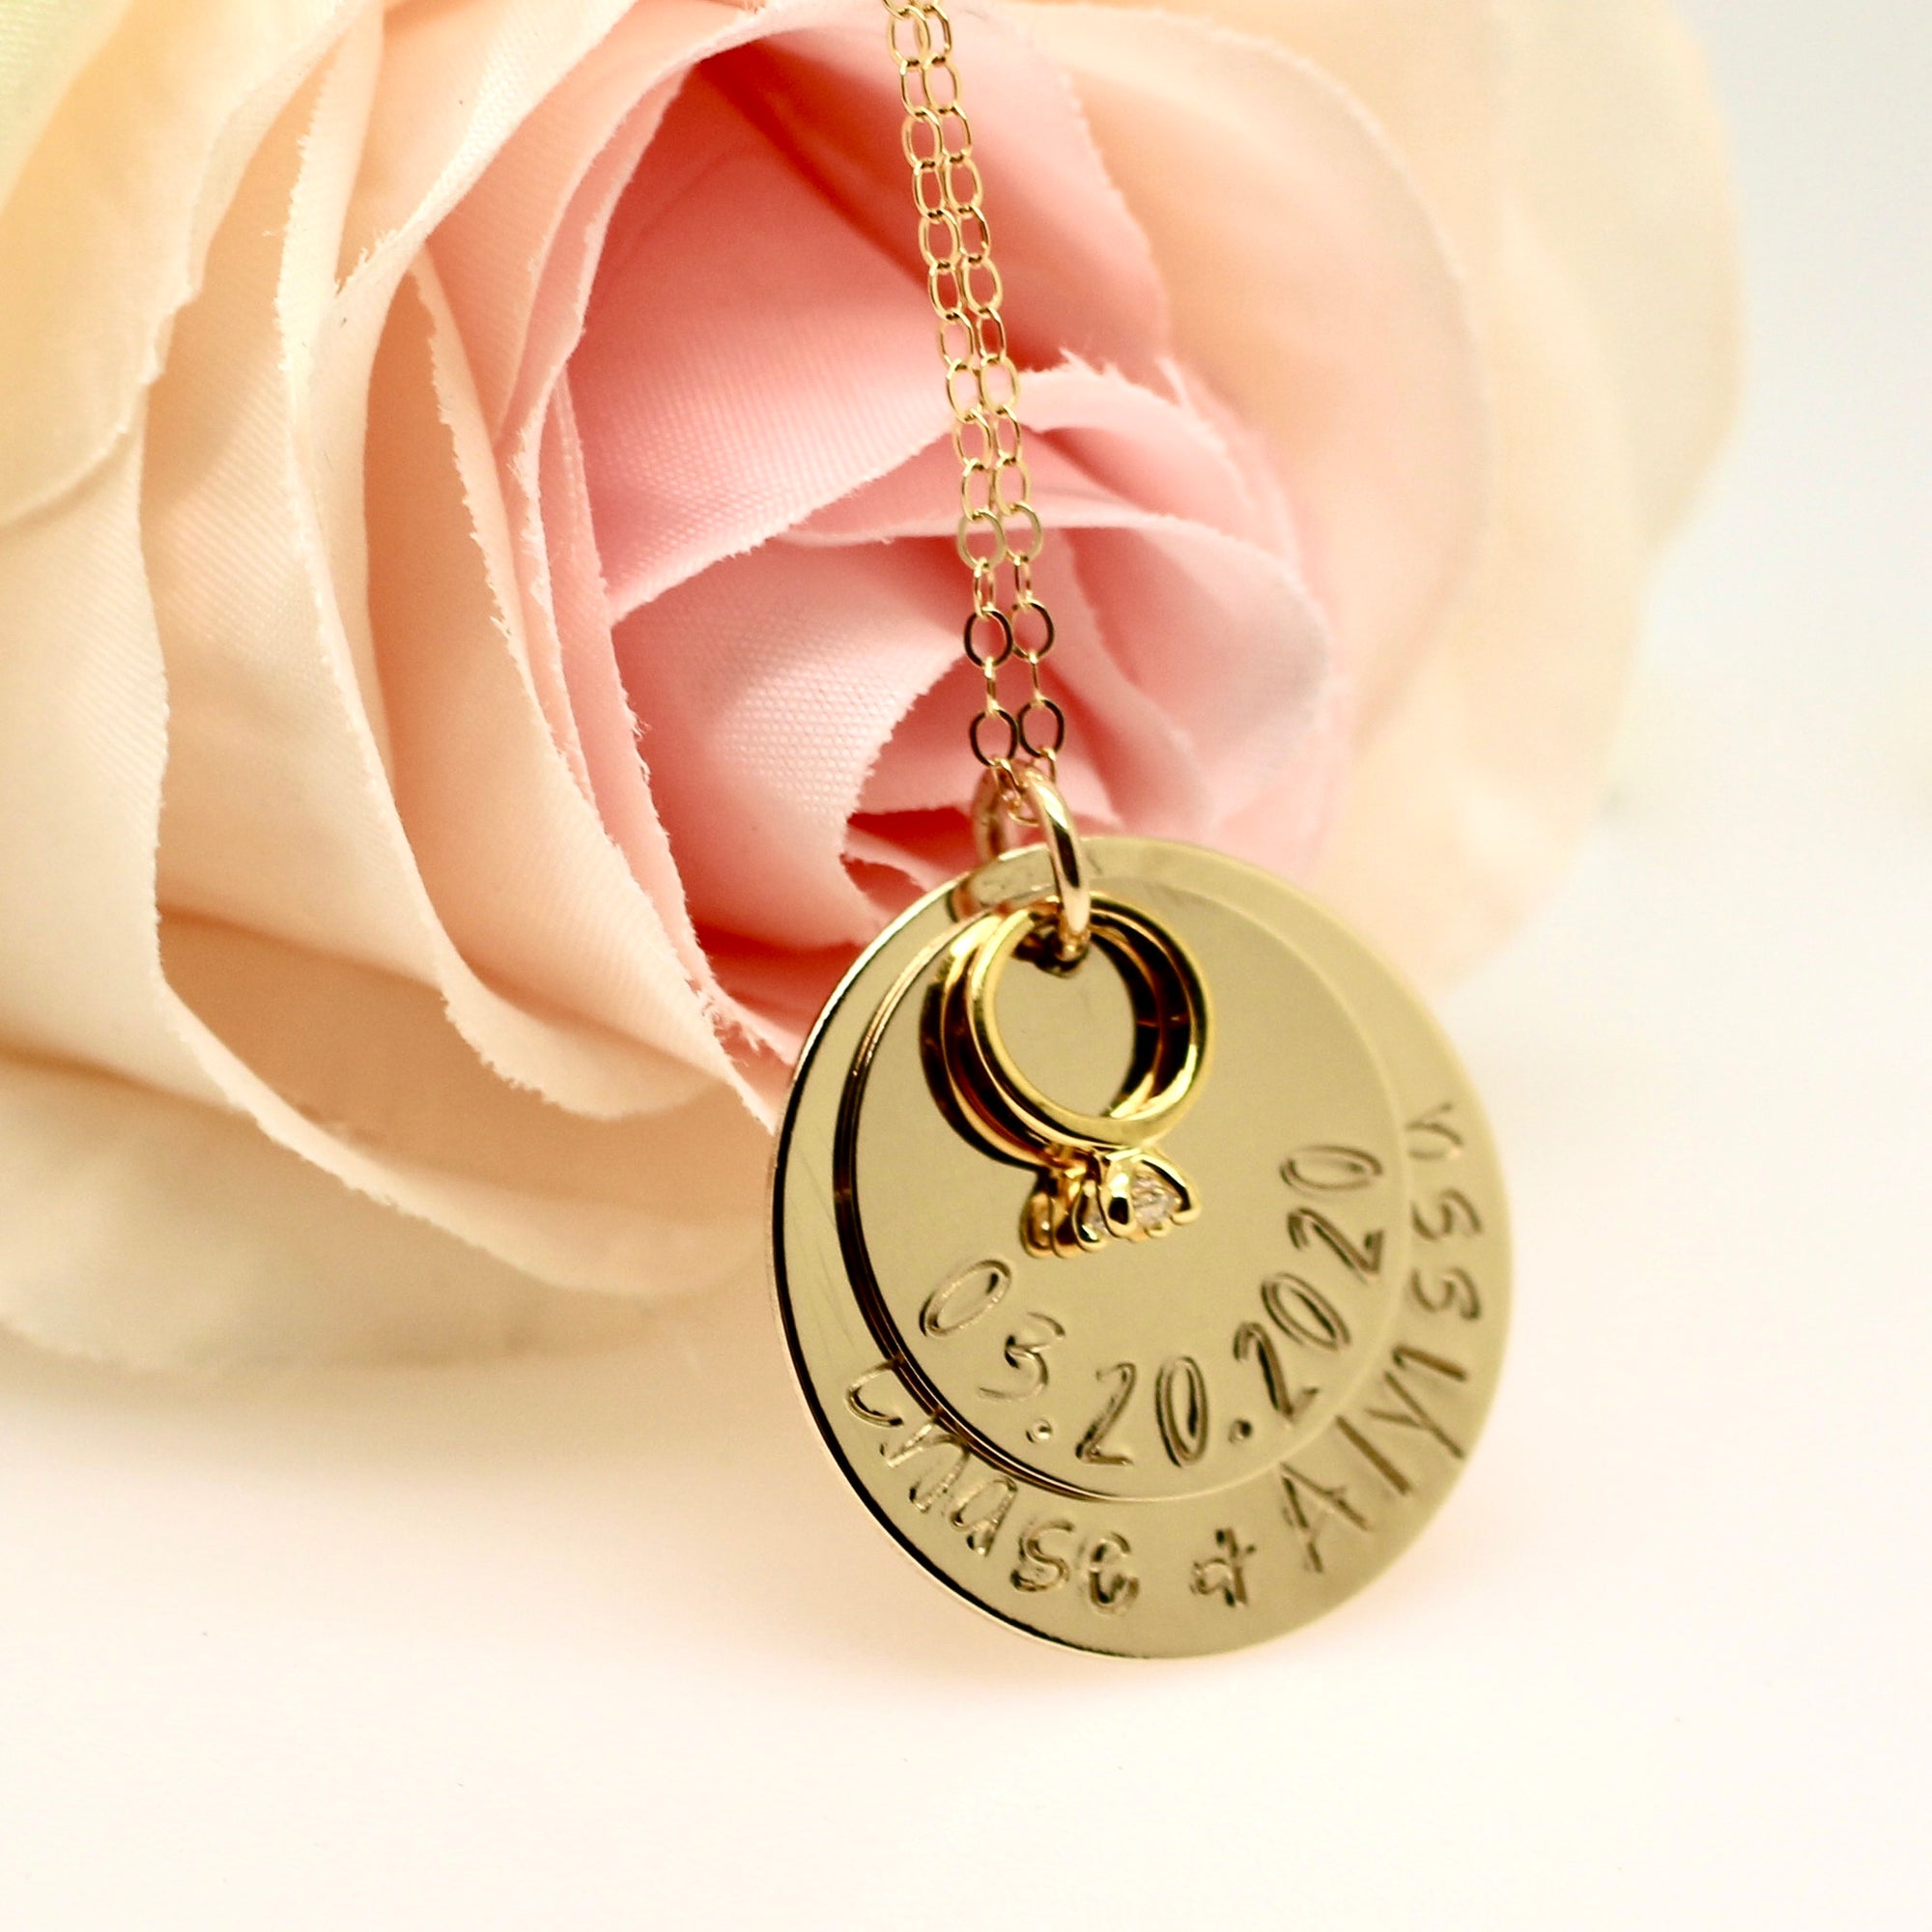 Wedding Ring Necklace - Gold Filled - Love It Personalized